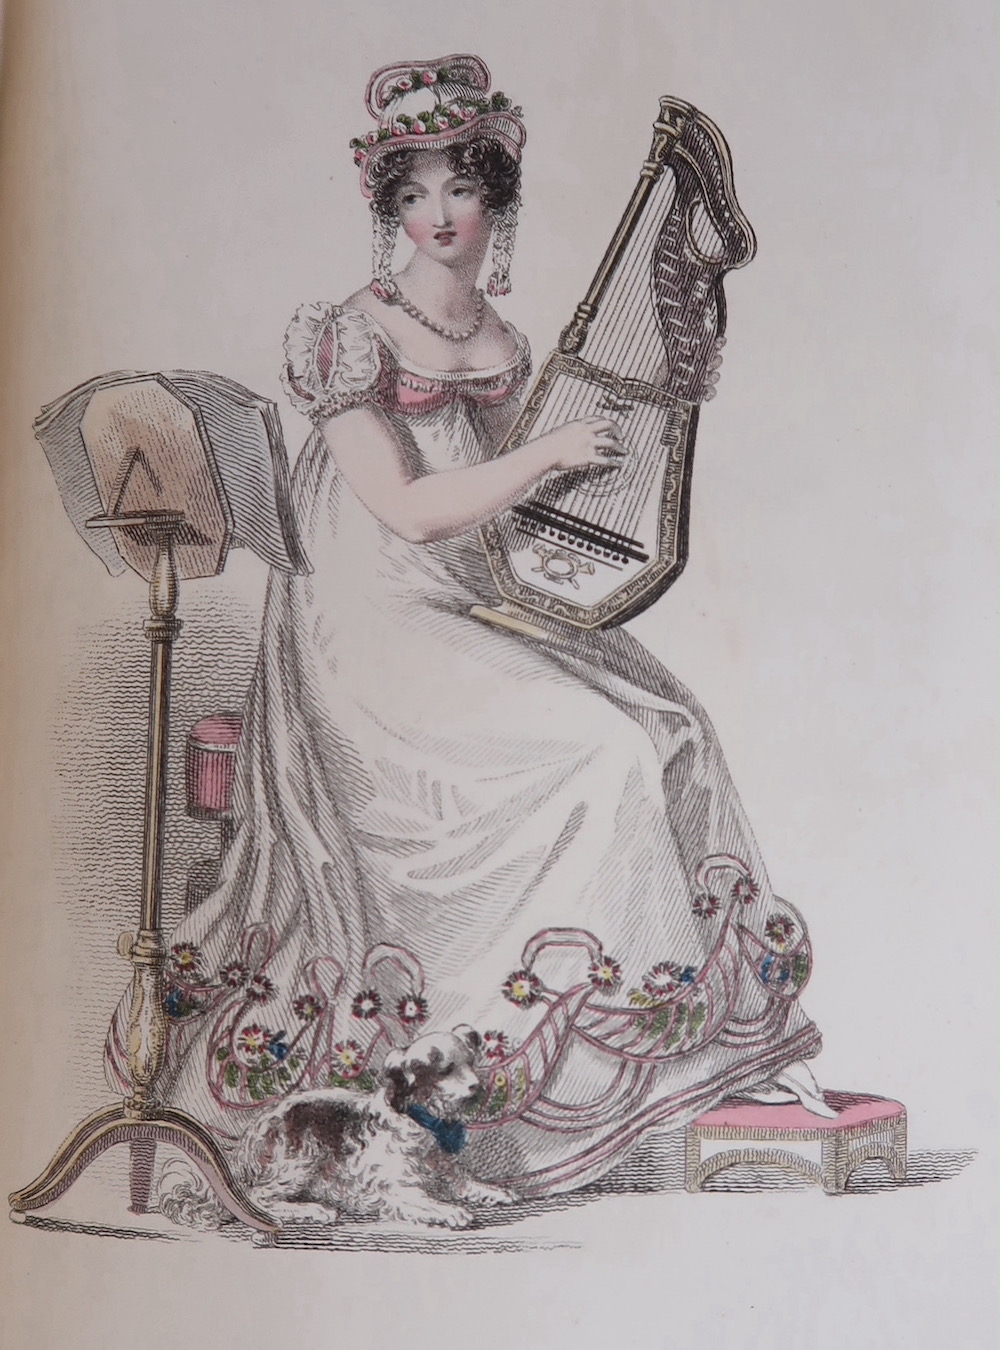 Fashion plate from Ackermann's Repository (1819)